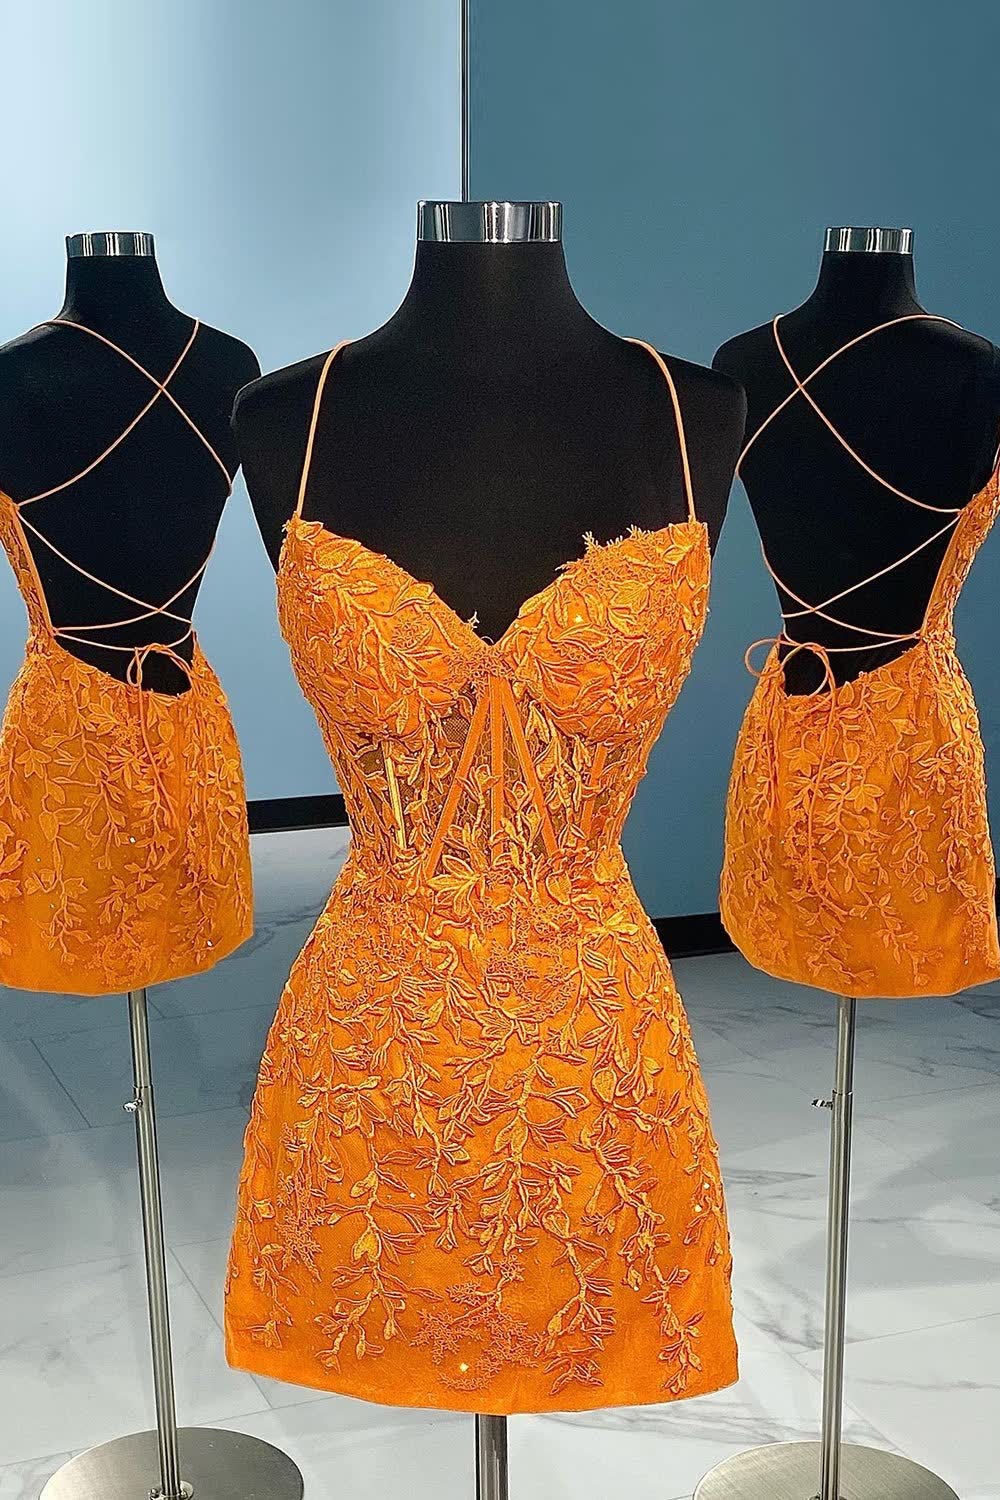 Orange Spaghetti Straps Tight Short Corset Homecoming Dress with Appliques Gowns, Orange Spaghetti Straps Tight Short Homecoming Dress with Appliques